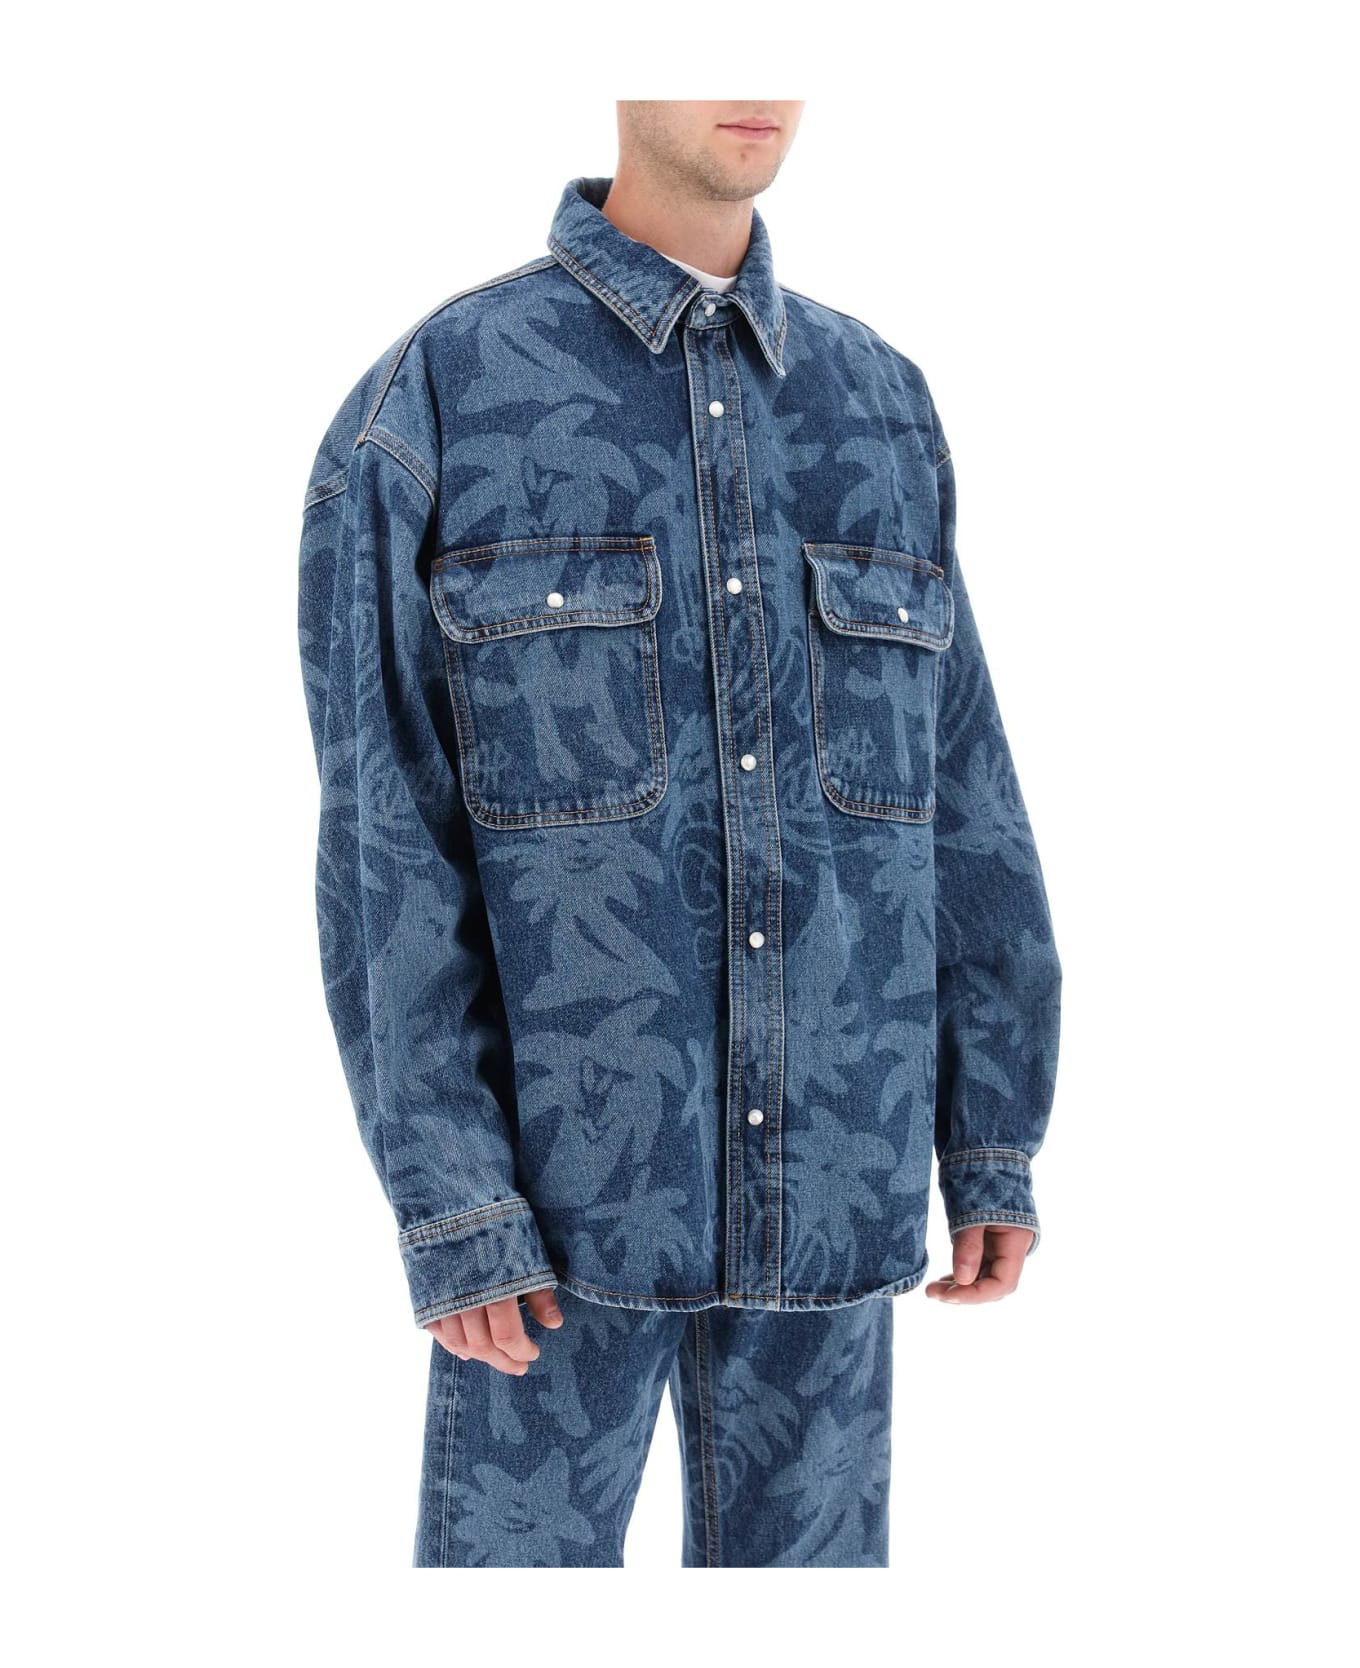 Palm Angels 'palmity' Overshirt In Denim With Laser Print All-over - DENIM BLUE